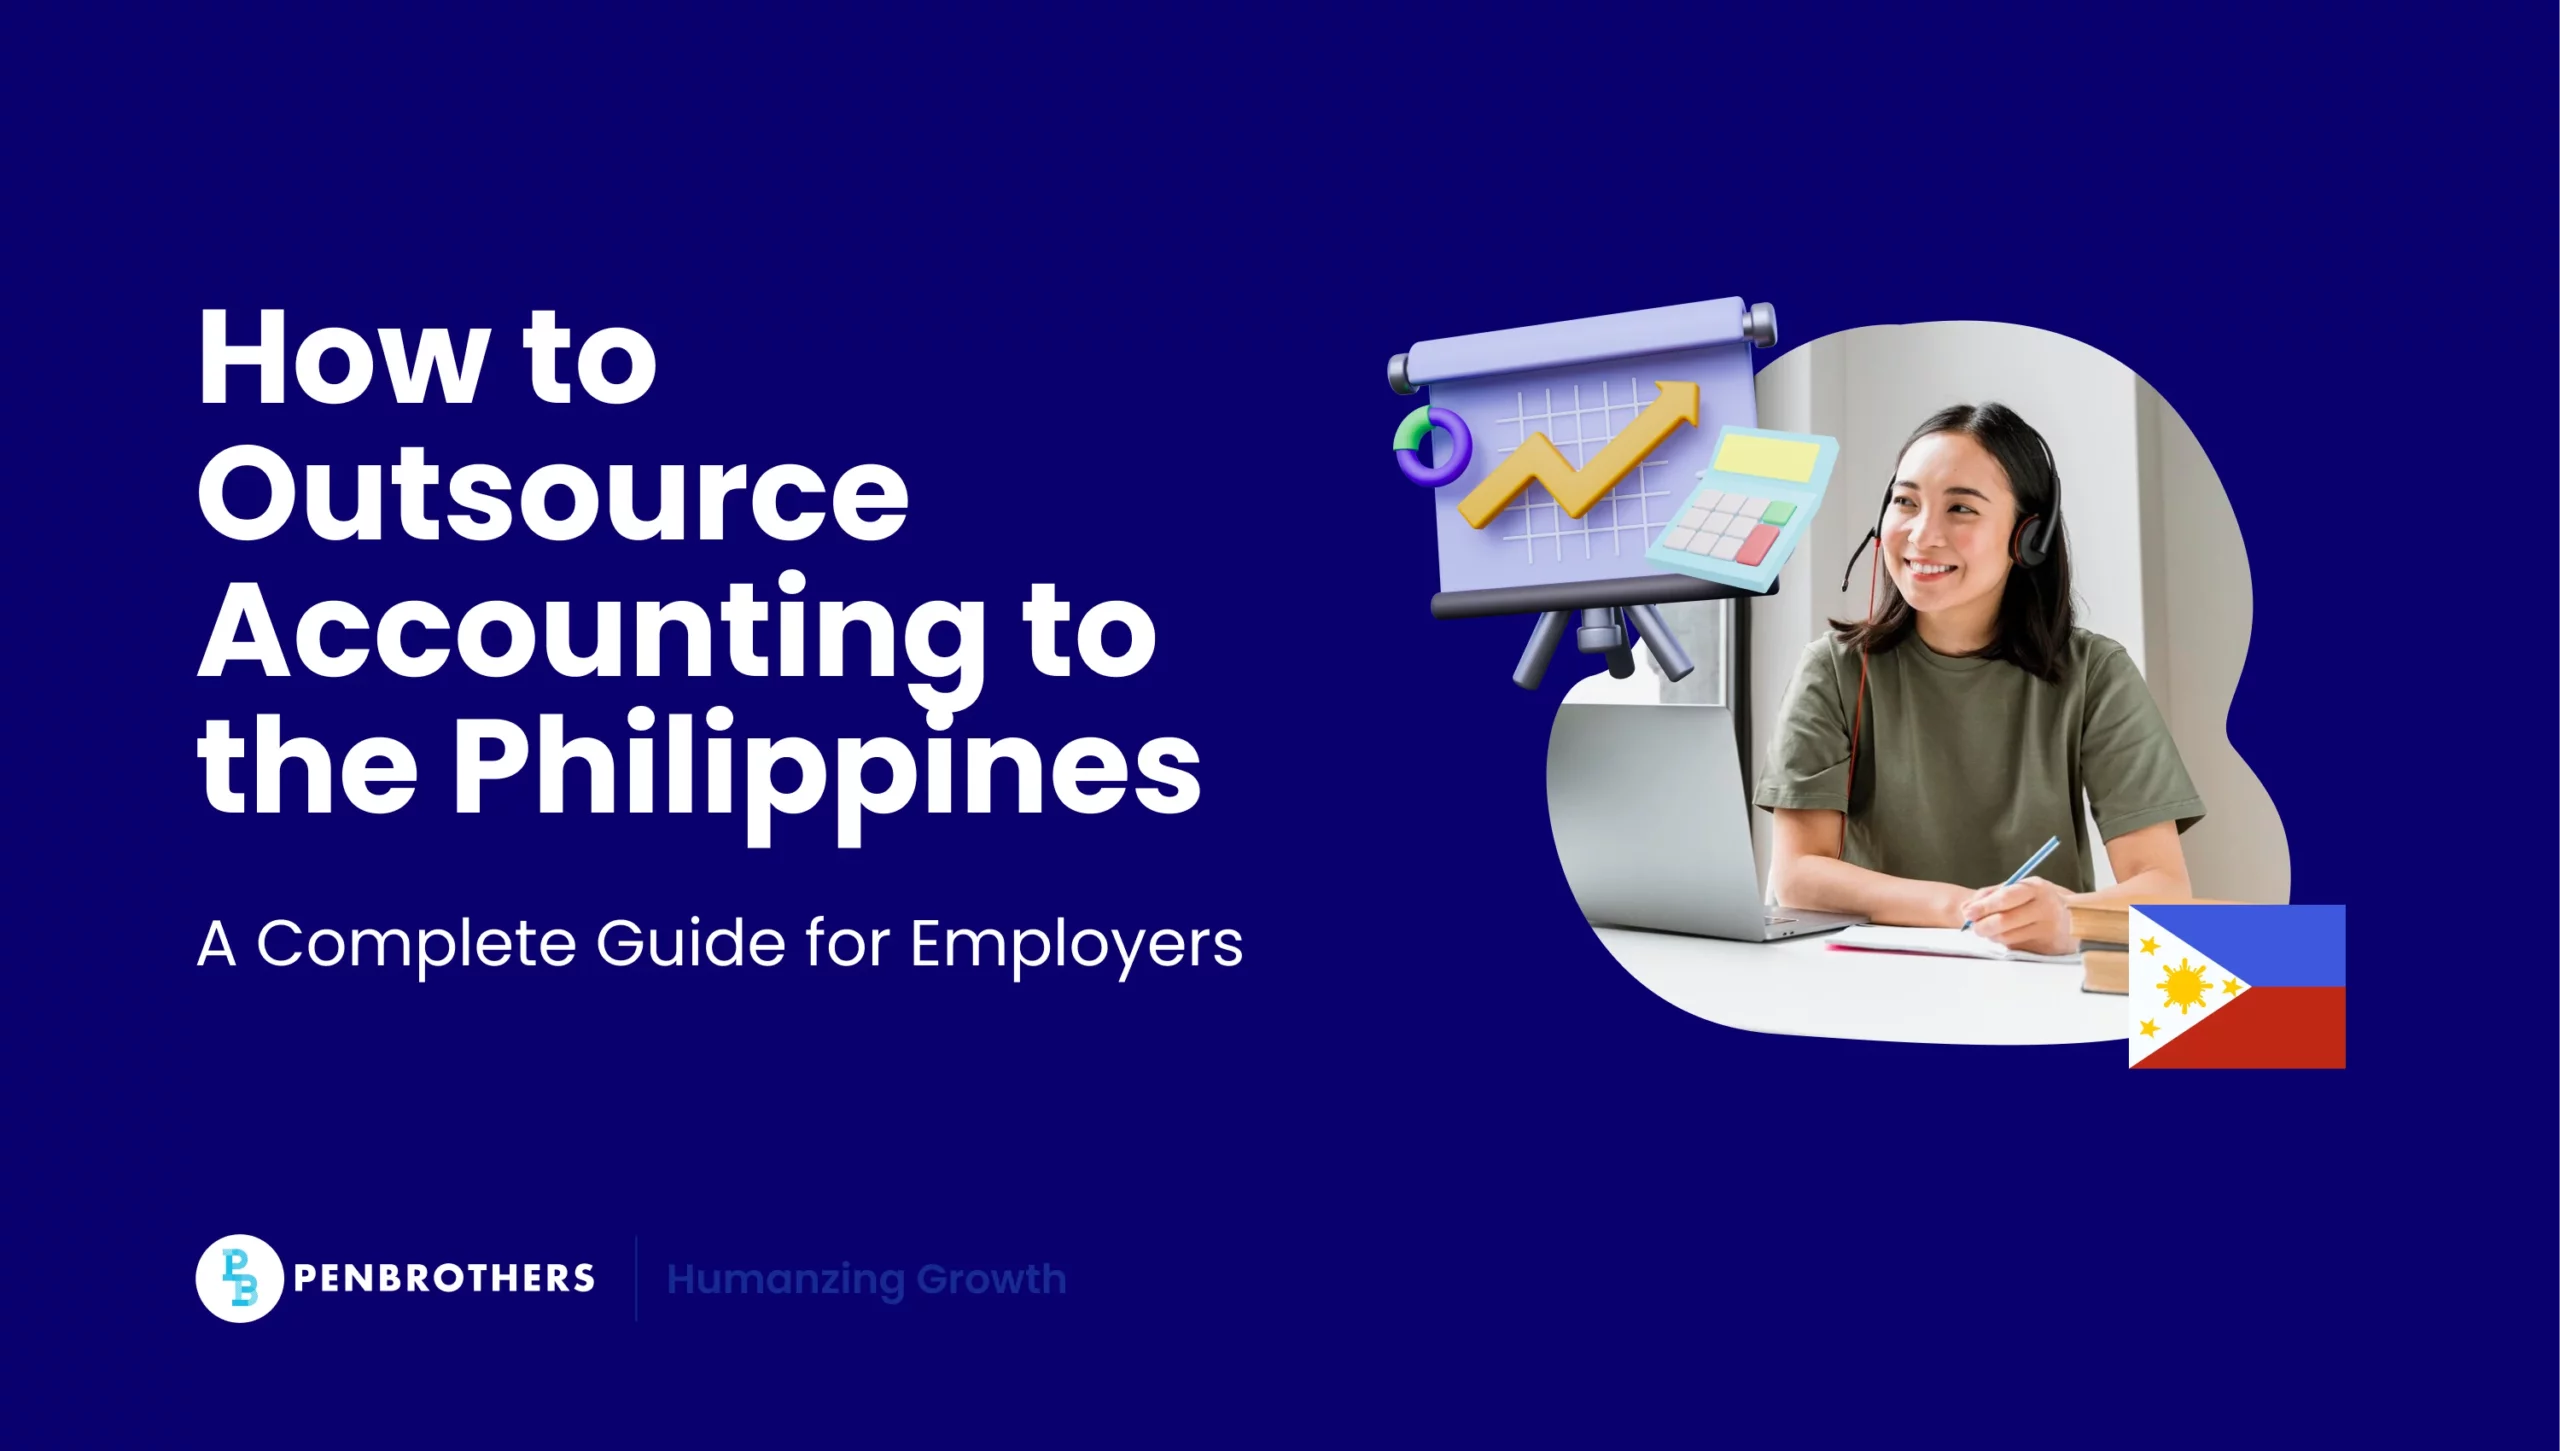 How to Outsource Accounting to the Philippines: A Complete Guide for Employers